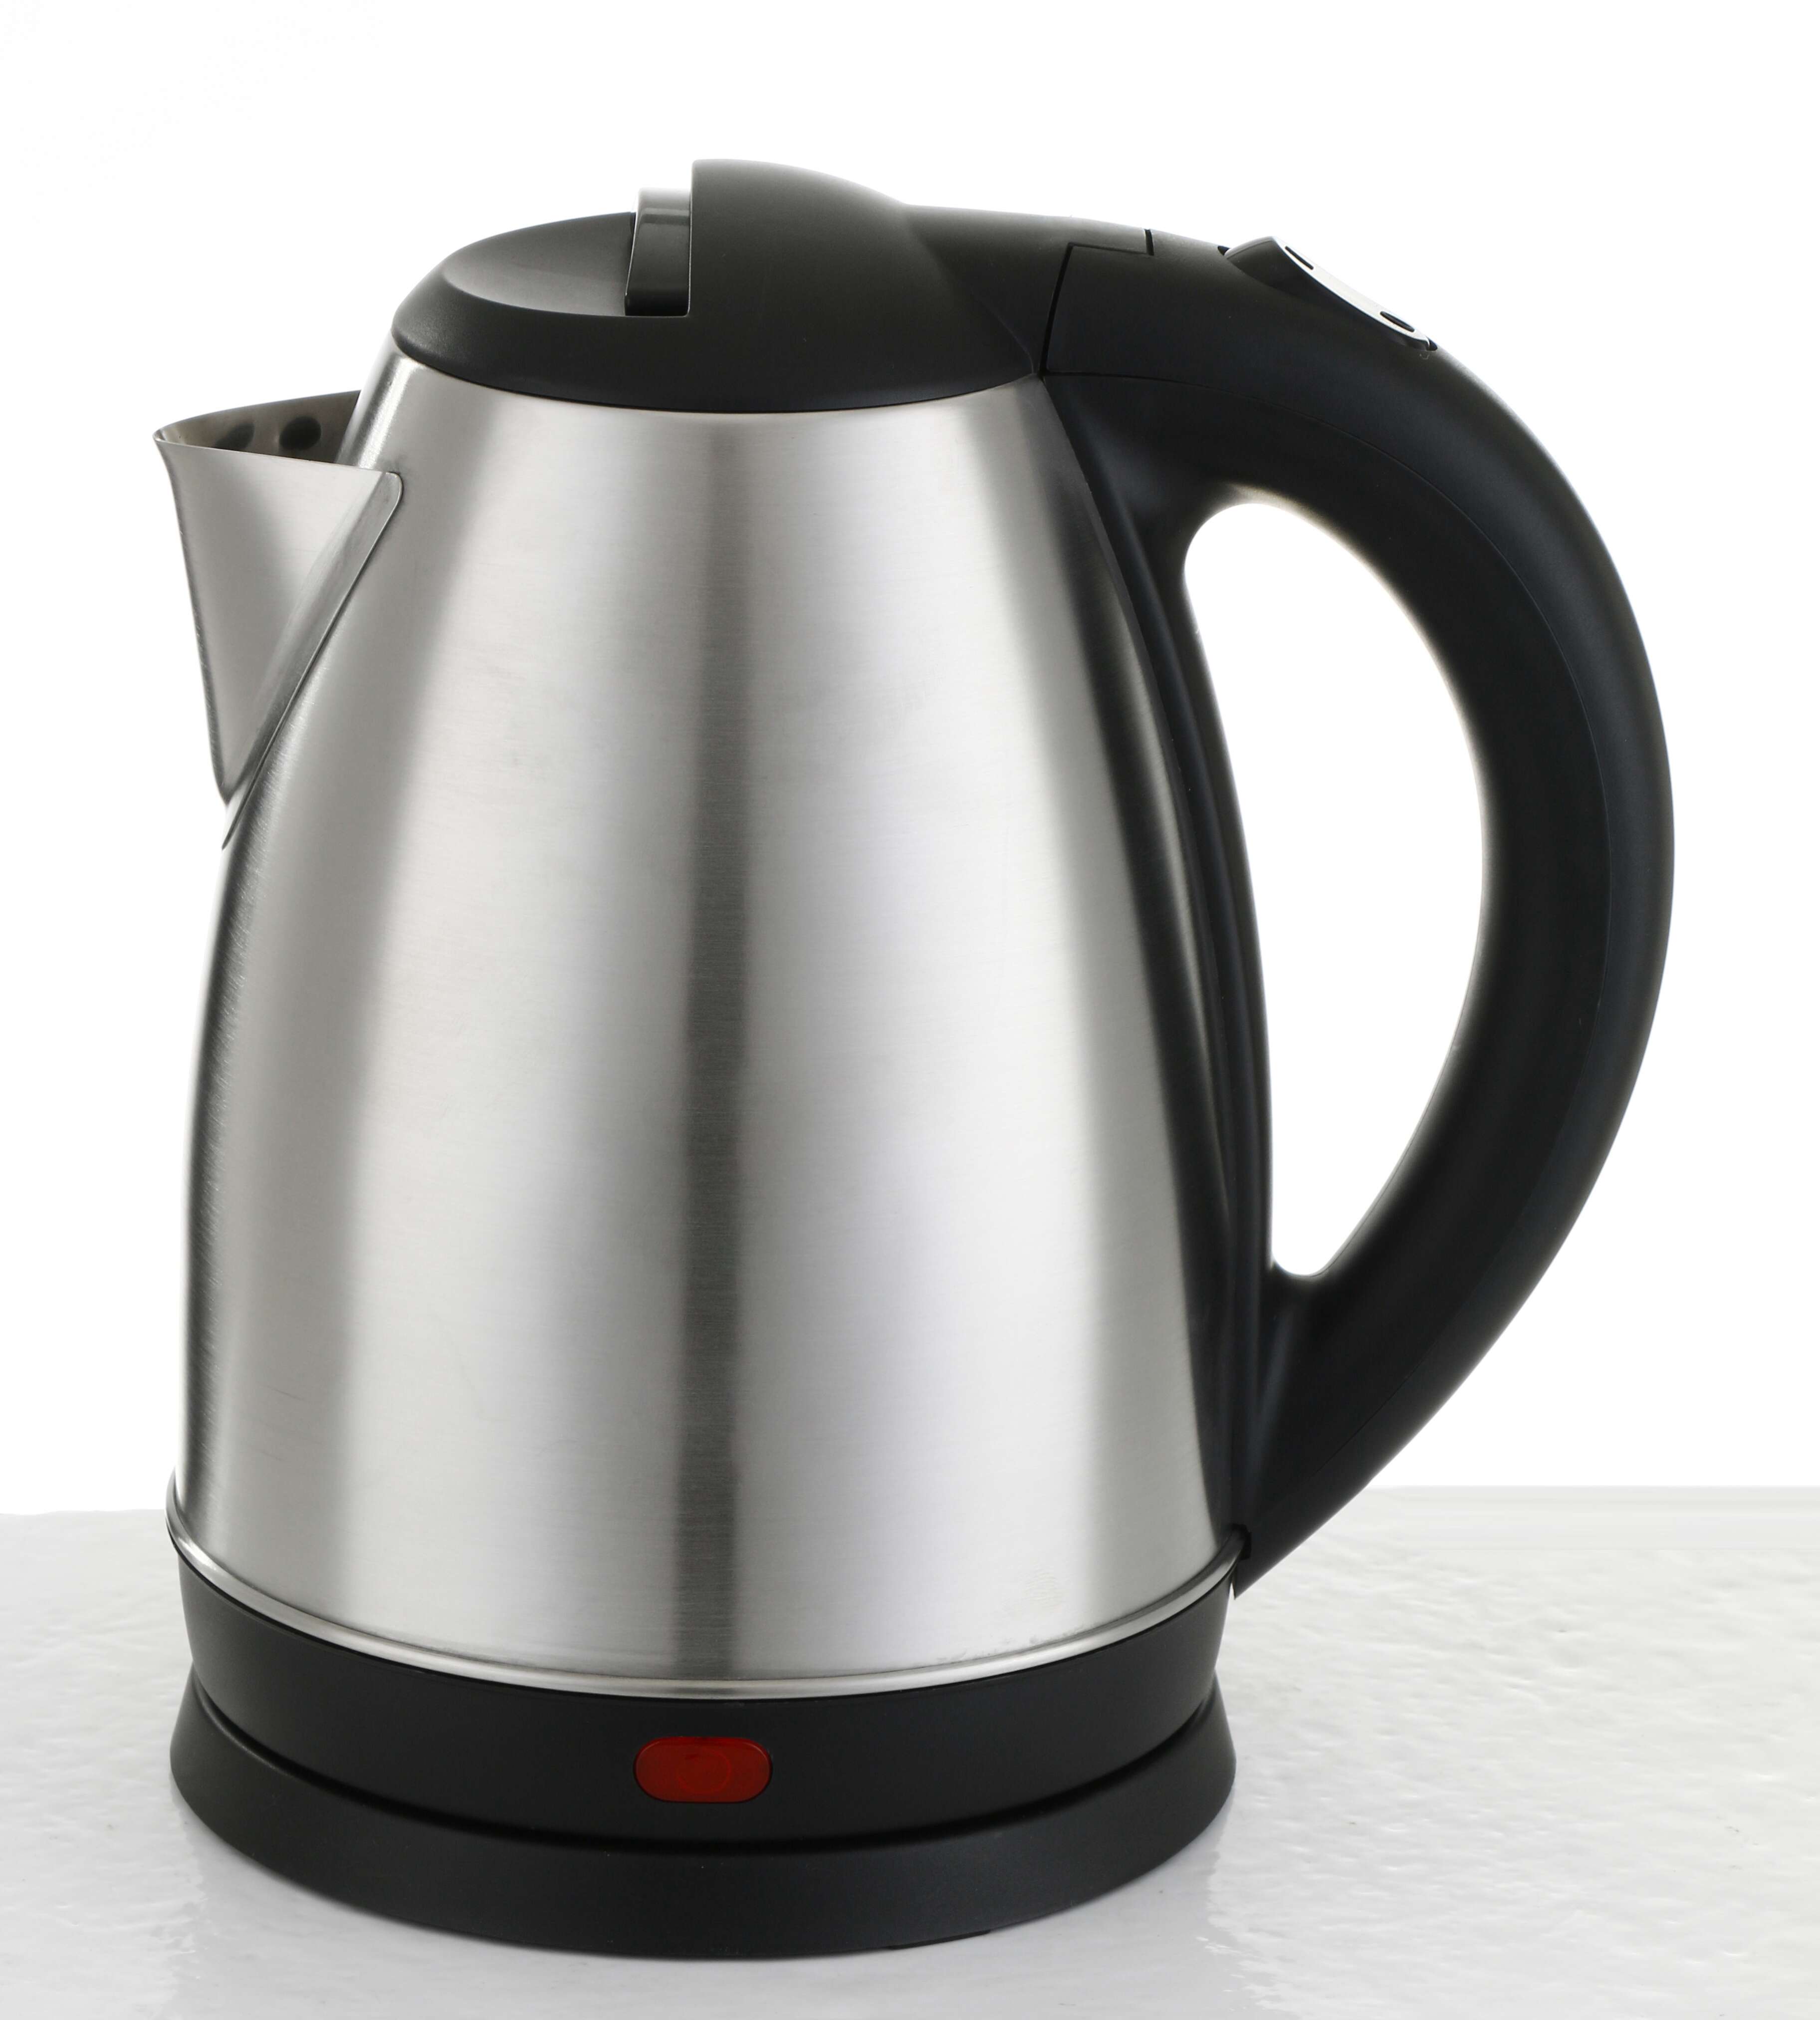 1.8L Stainless steel housing electric water kettle